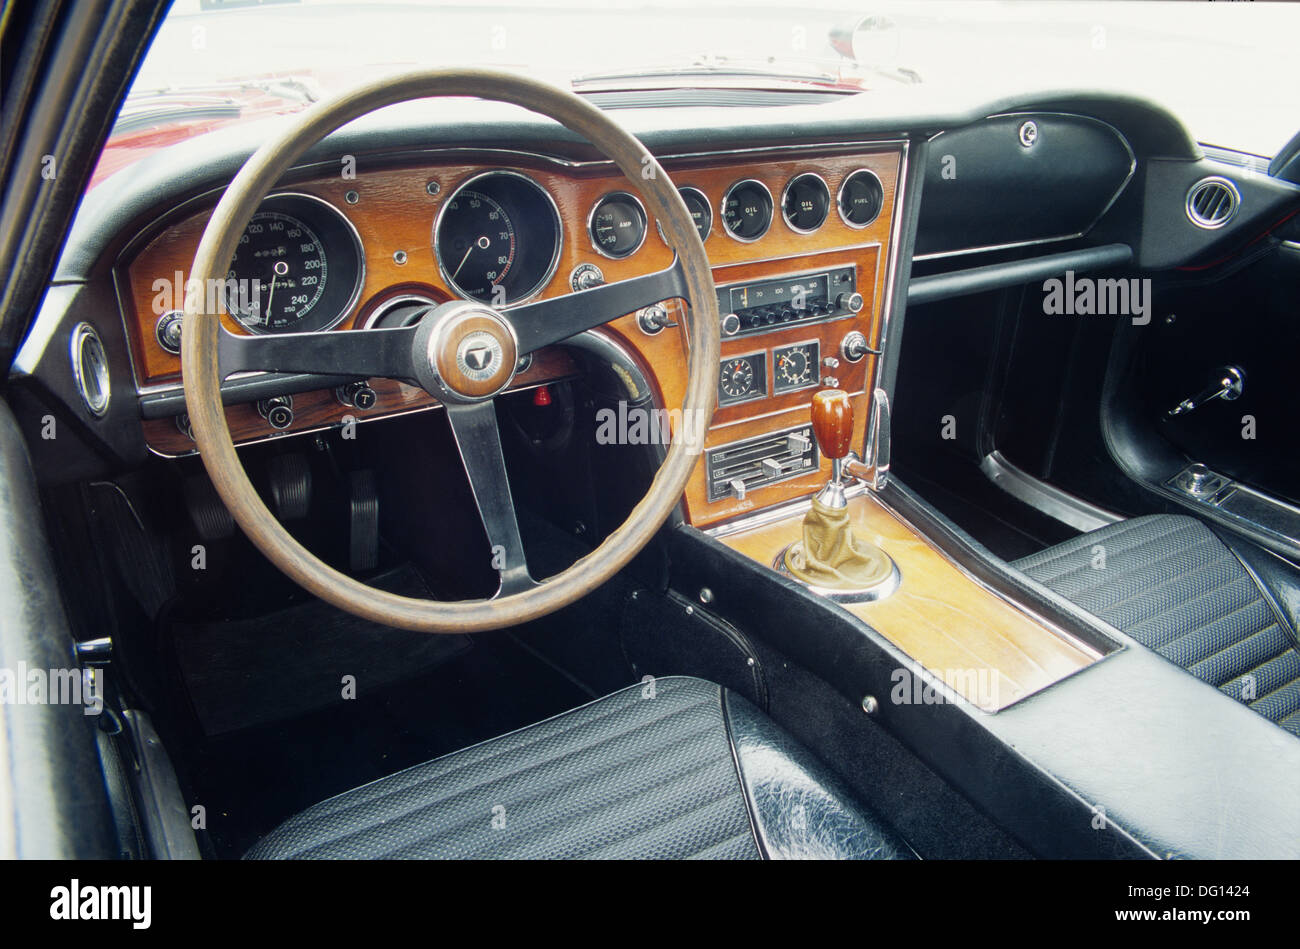 Toyota 2000GT - Japanese sports car 1960s 2000 GT interior view Stock Photo